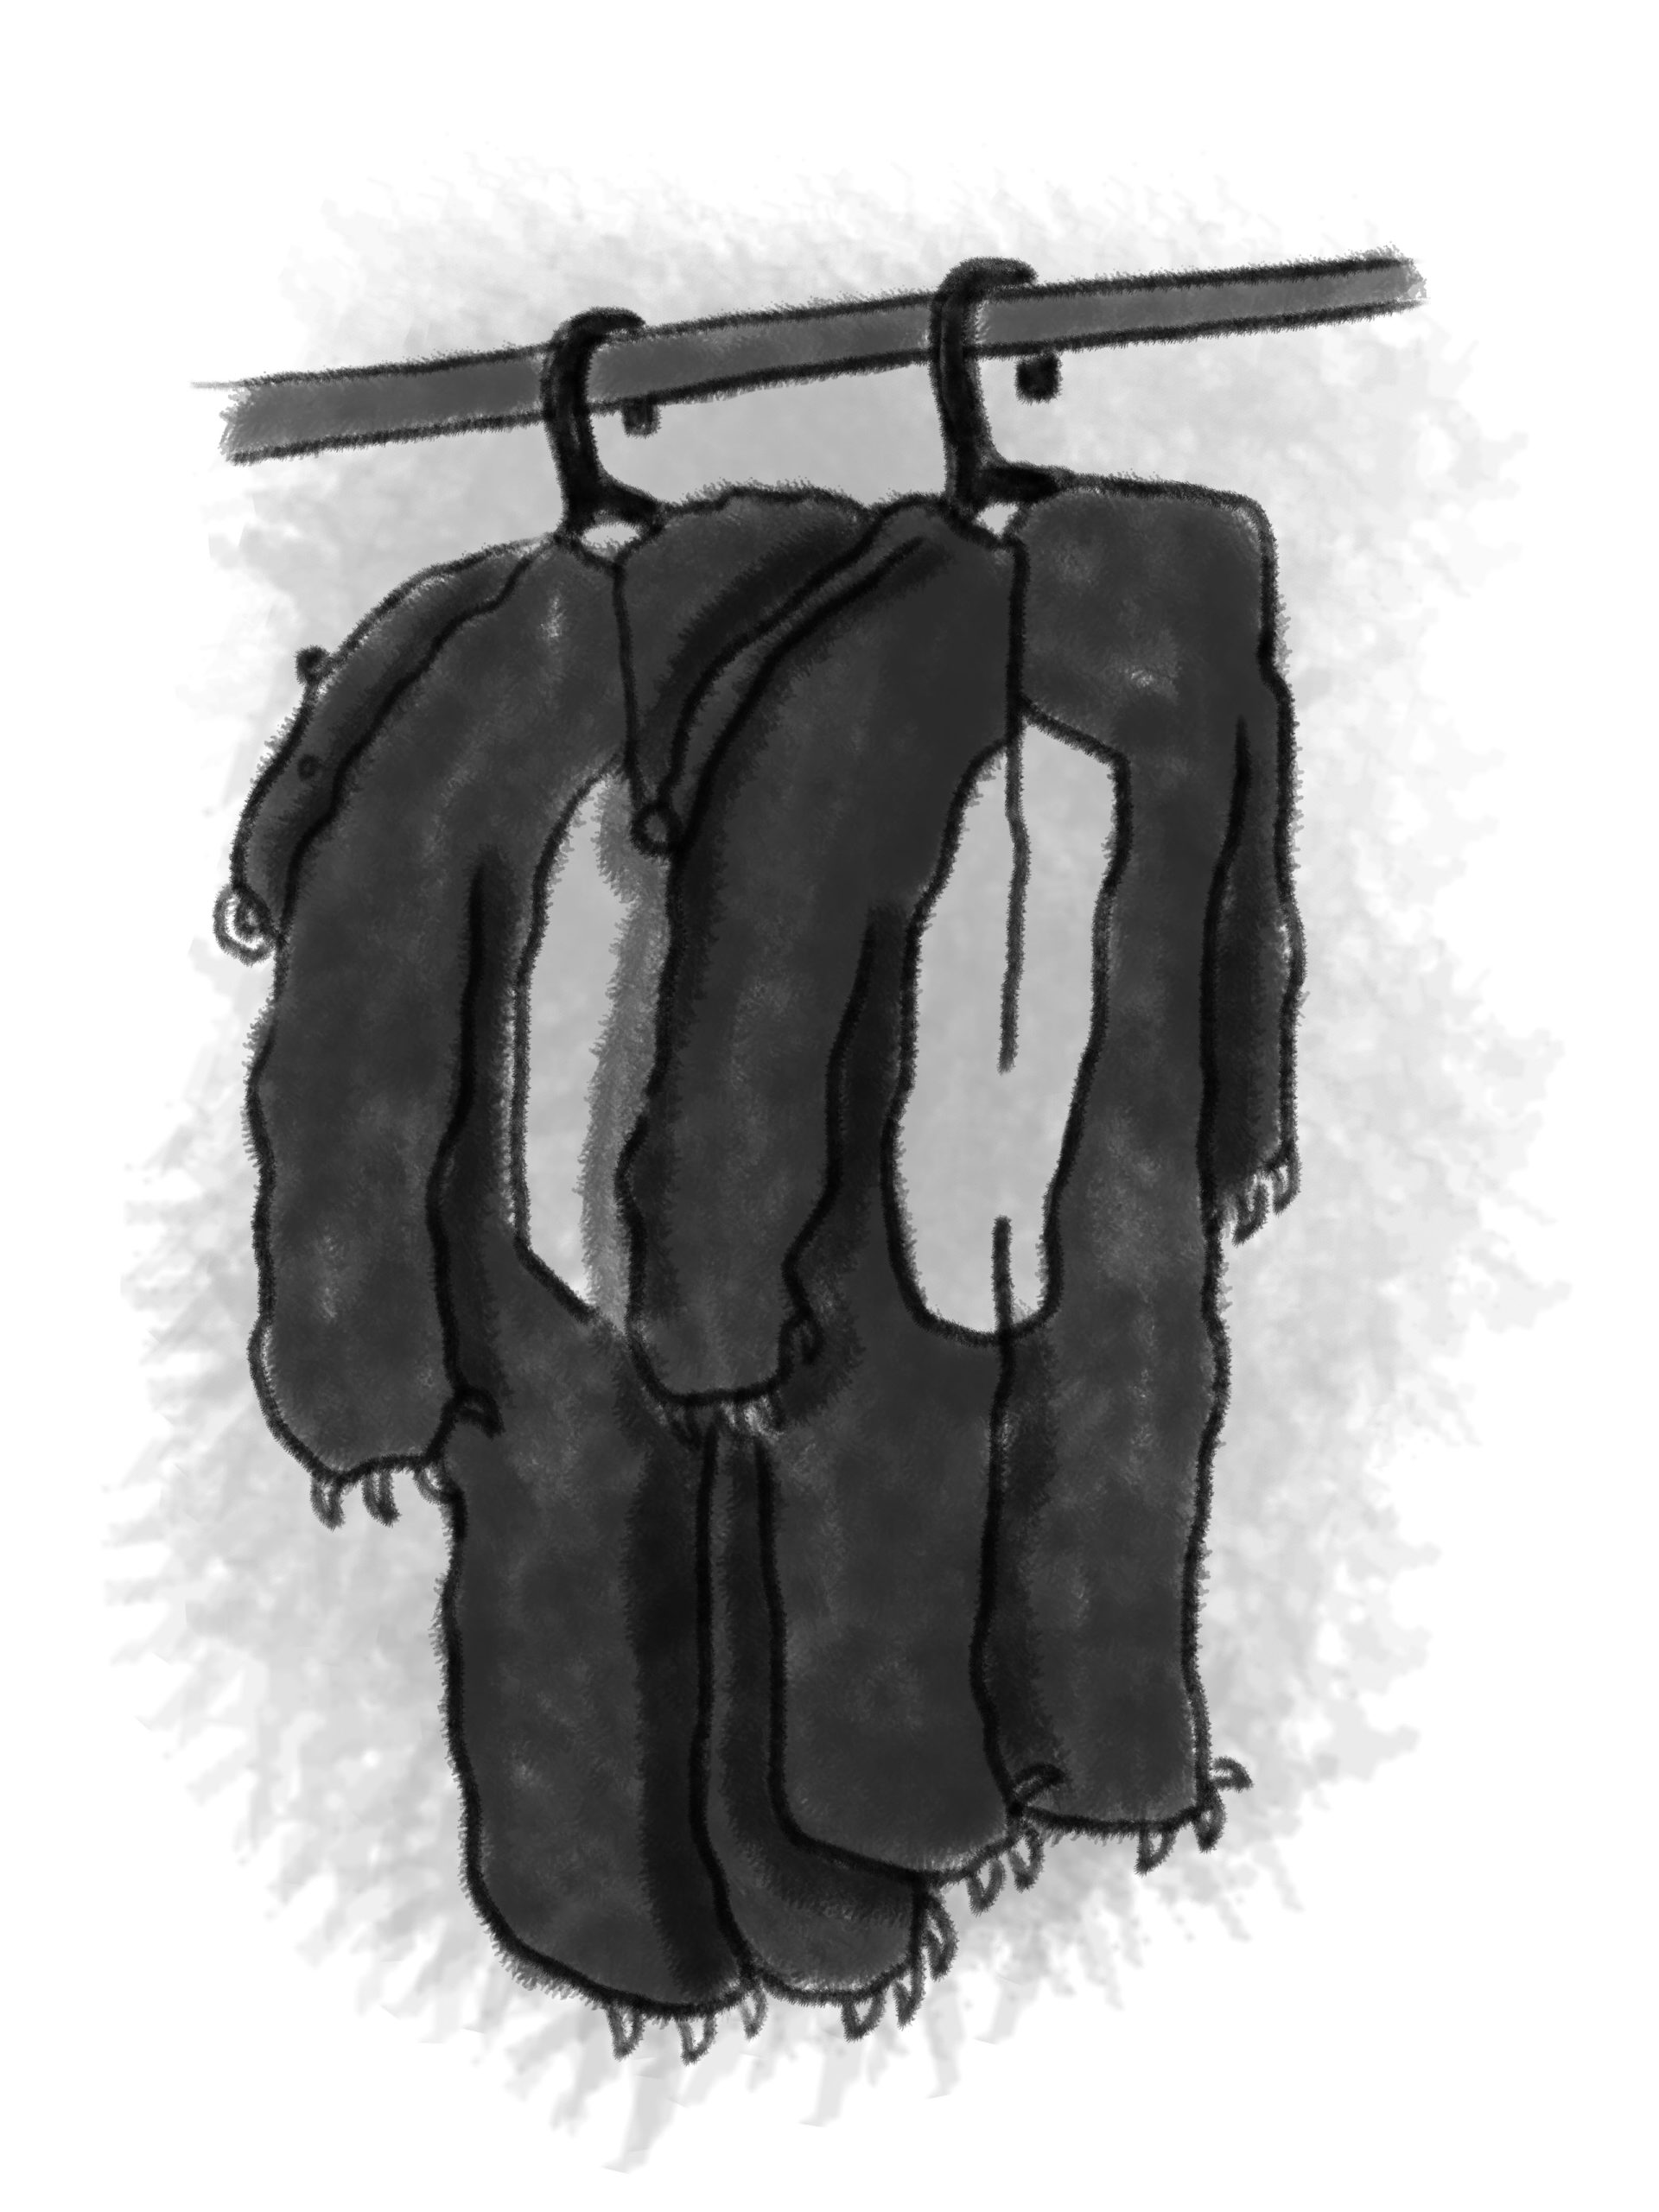 Two bear costumes hanging from a rack.